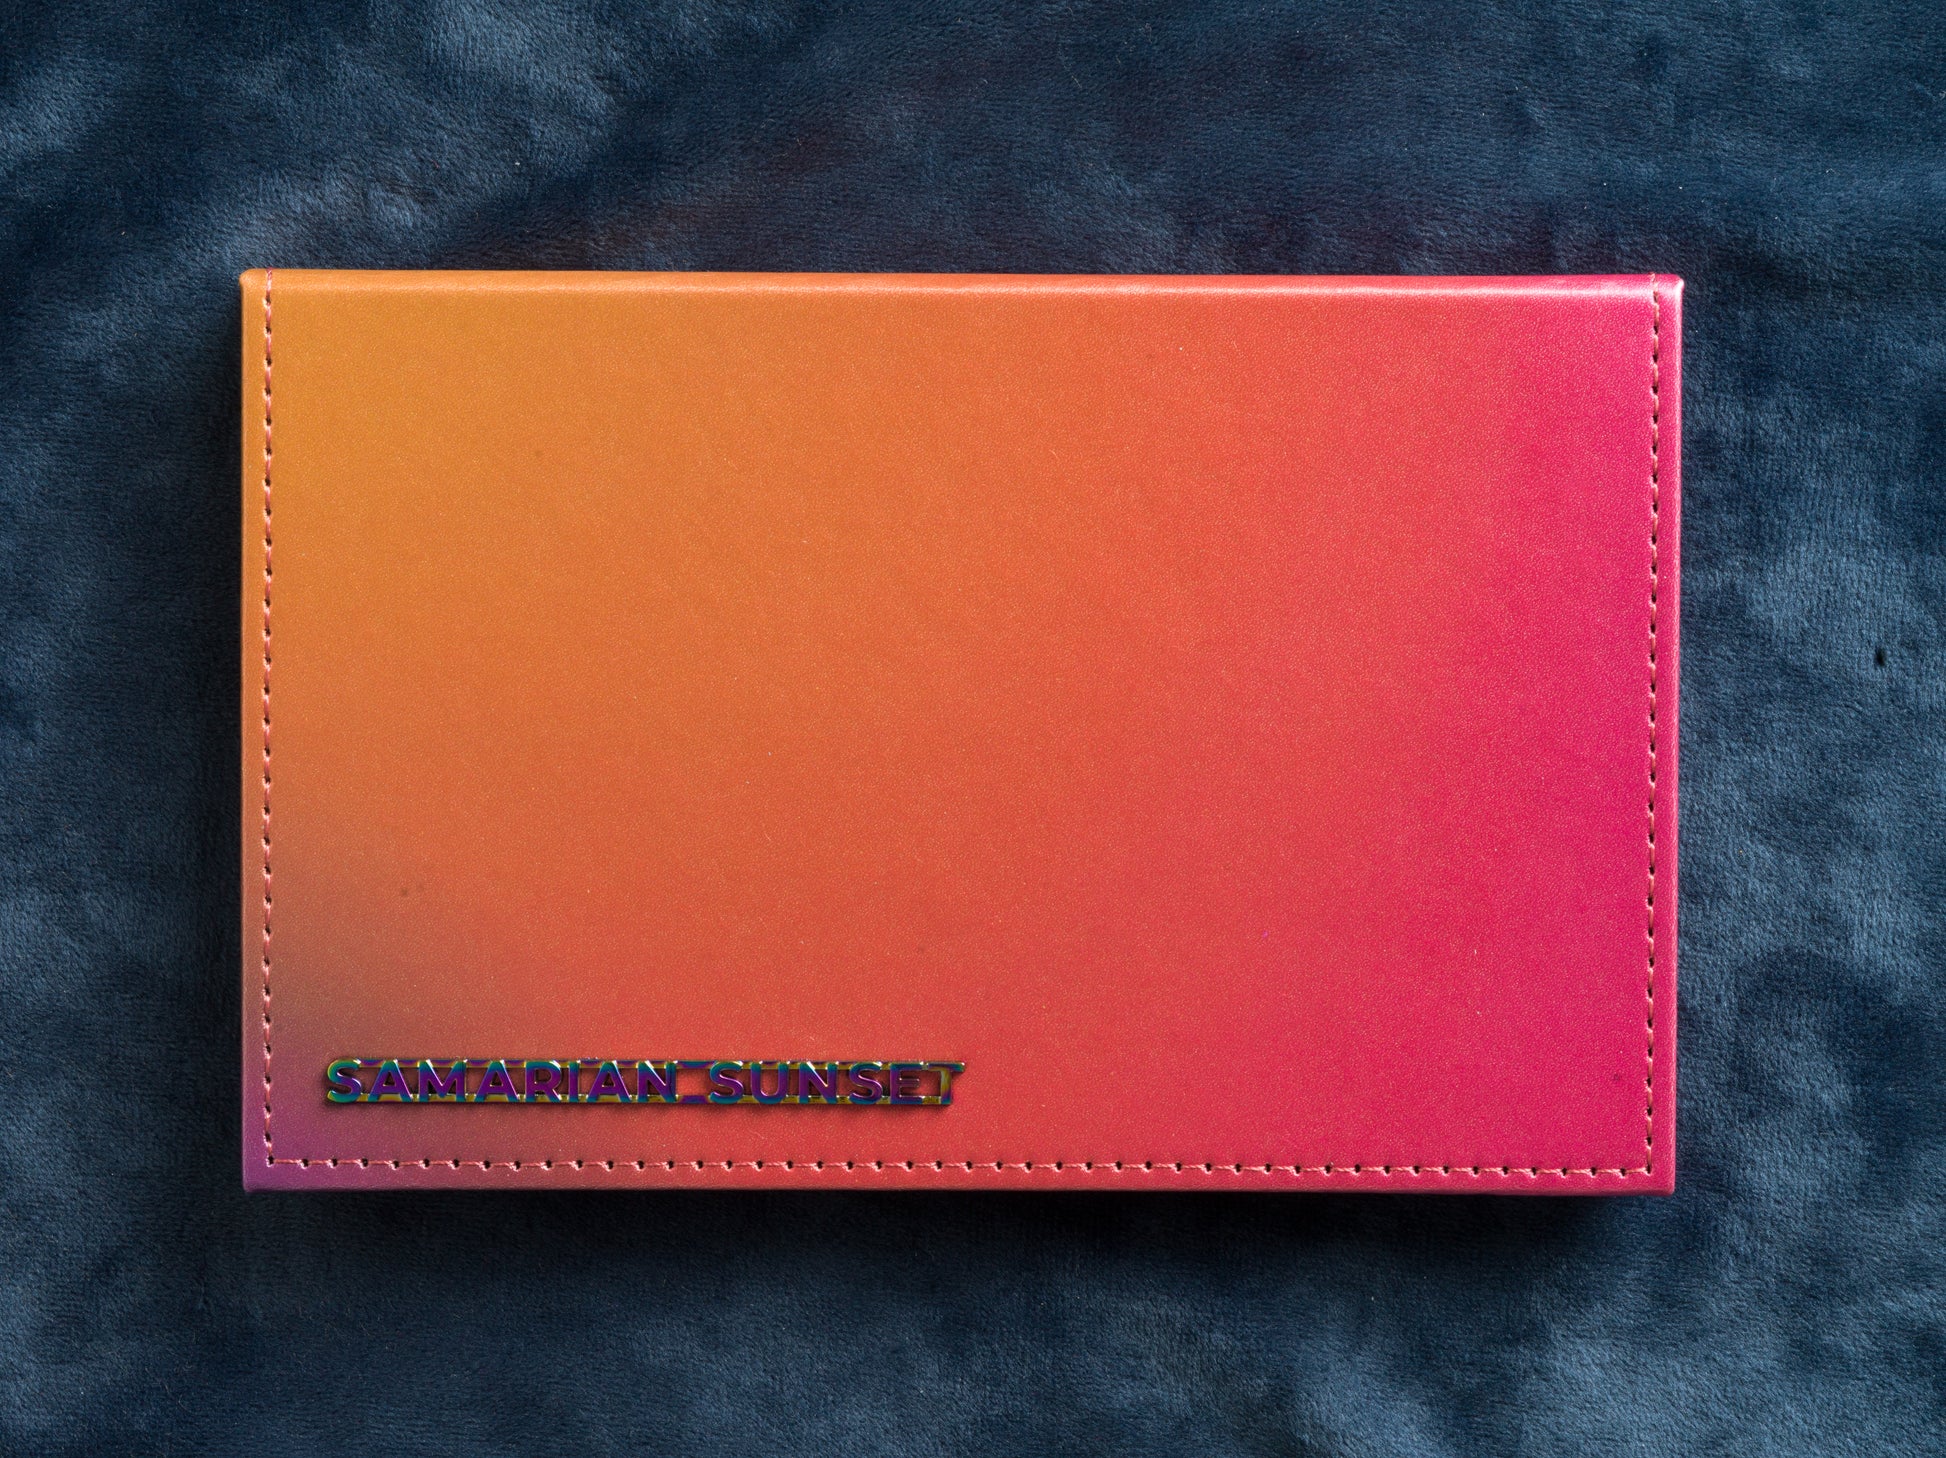 Samarian Sunset palette closed by Adept Cosmetics